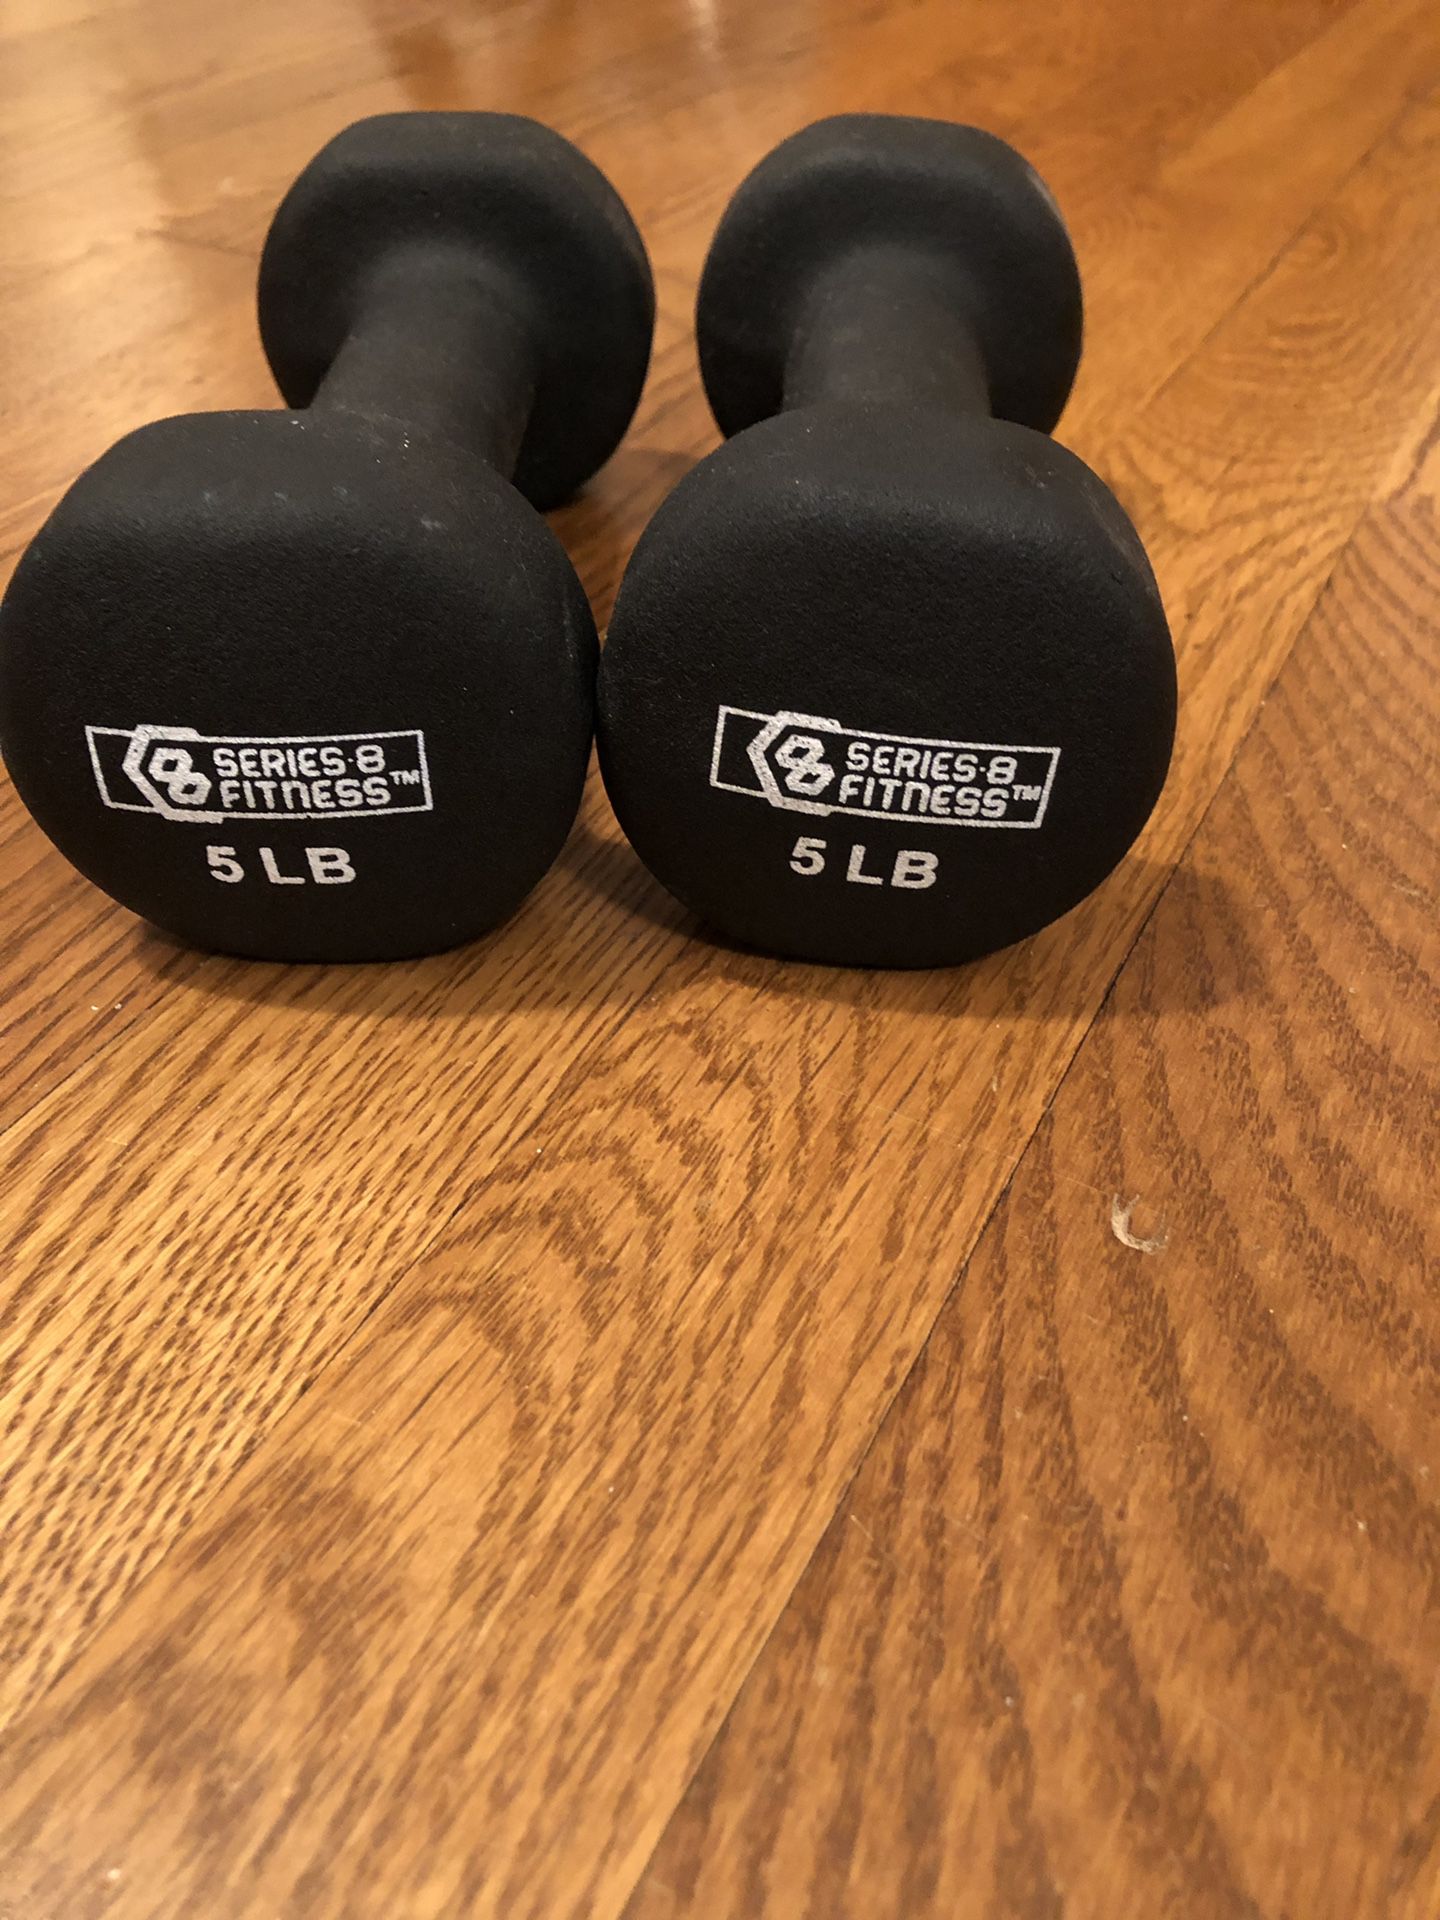 5lb weights - series 8 fitness brand